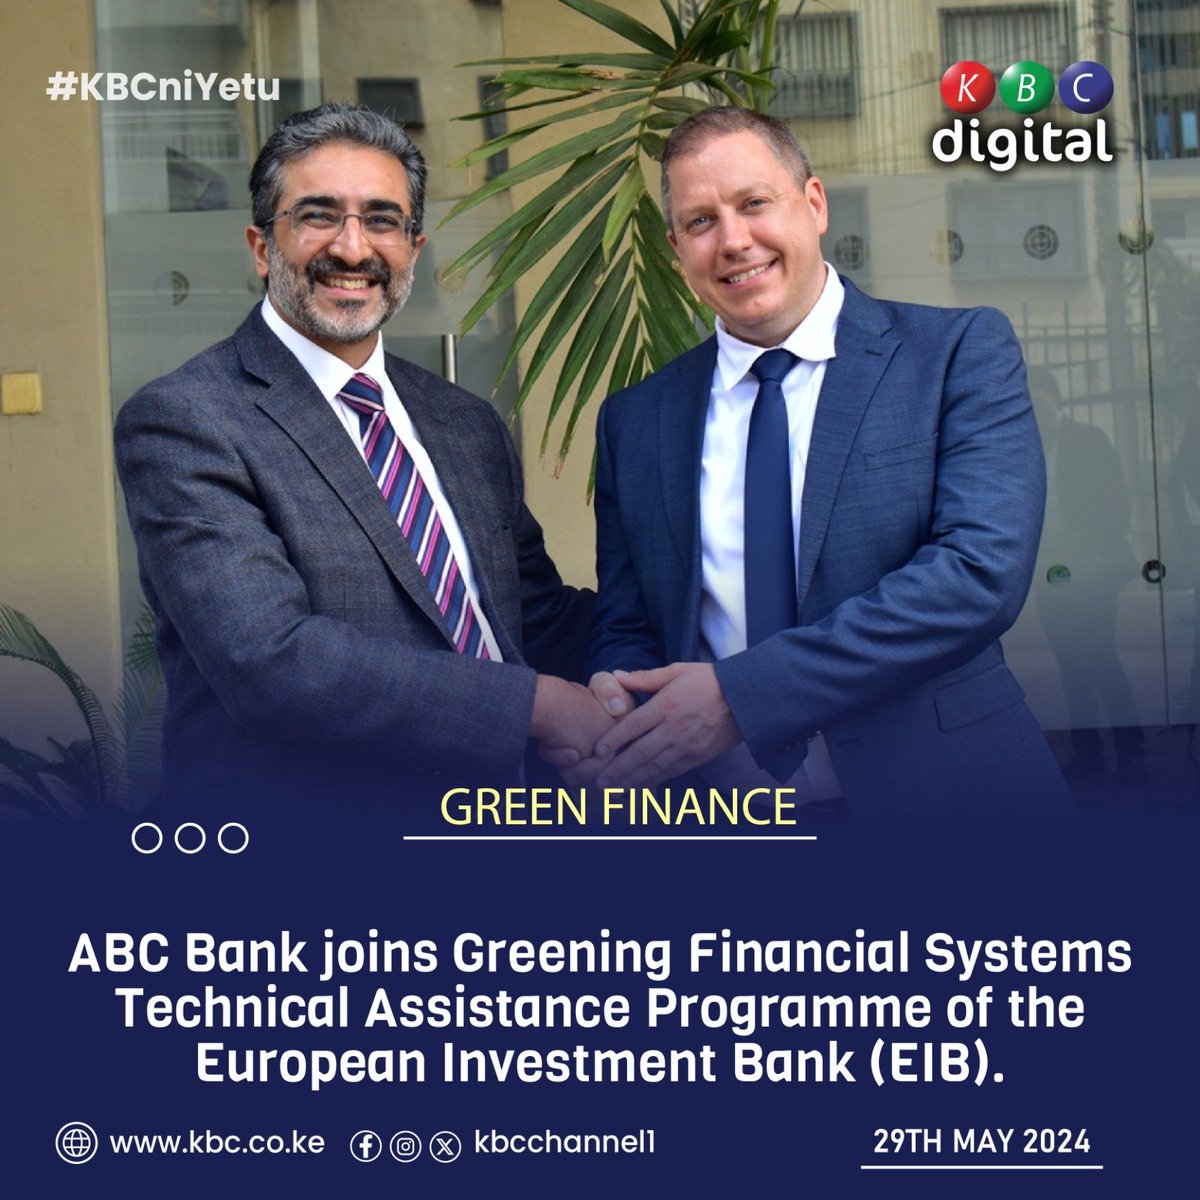 GREEN FINANCE ABC Bank joins Greening Financial Systems Technical Assistance Programme of the European Investment Bank (EIB). #KBCniYetu^EM